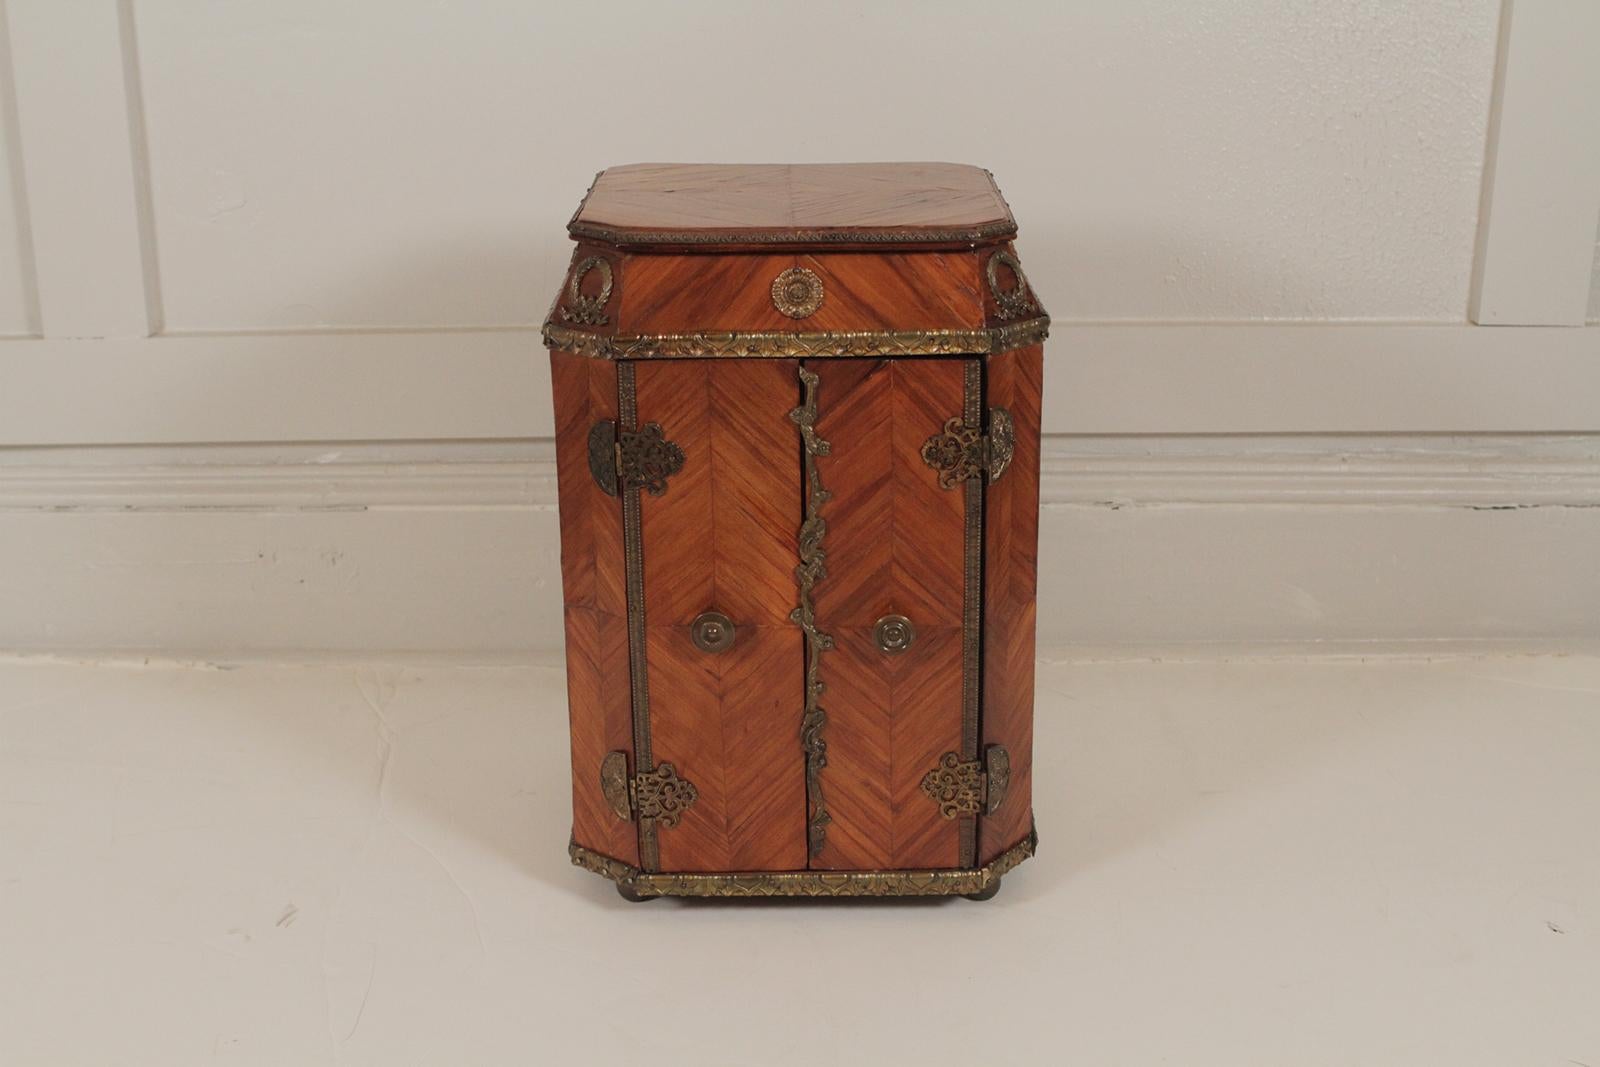 A French miniature doored chest in tulipwood with gilt bronze mounts. The diminutive chest with two doors that open to reveal five drawers. Beautiful tabletop chest for jewelry or other treasures.
 